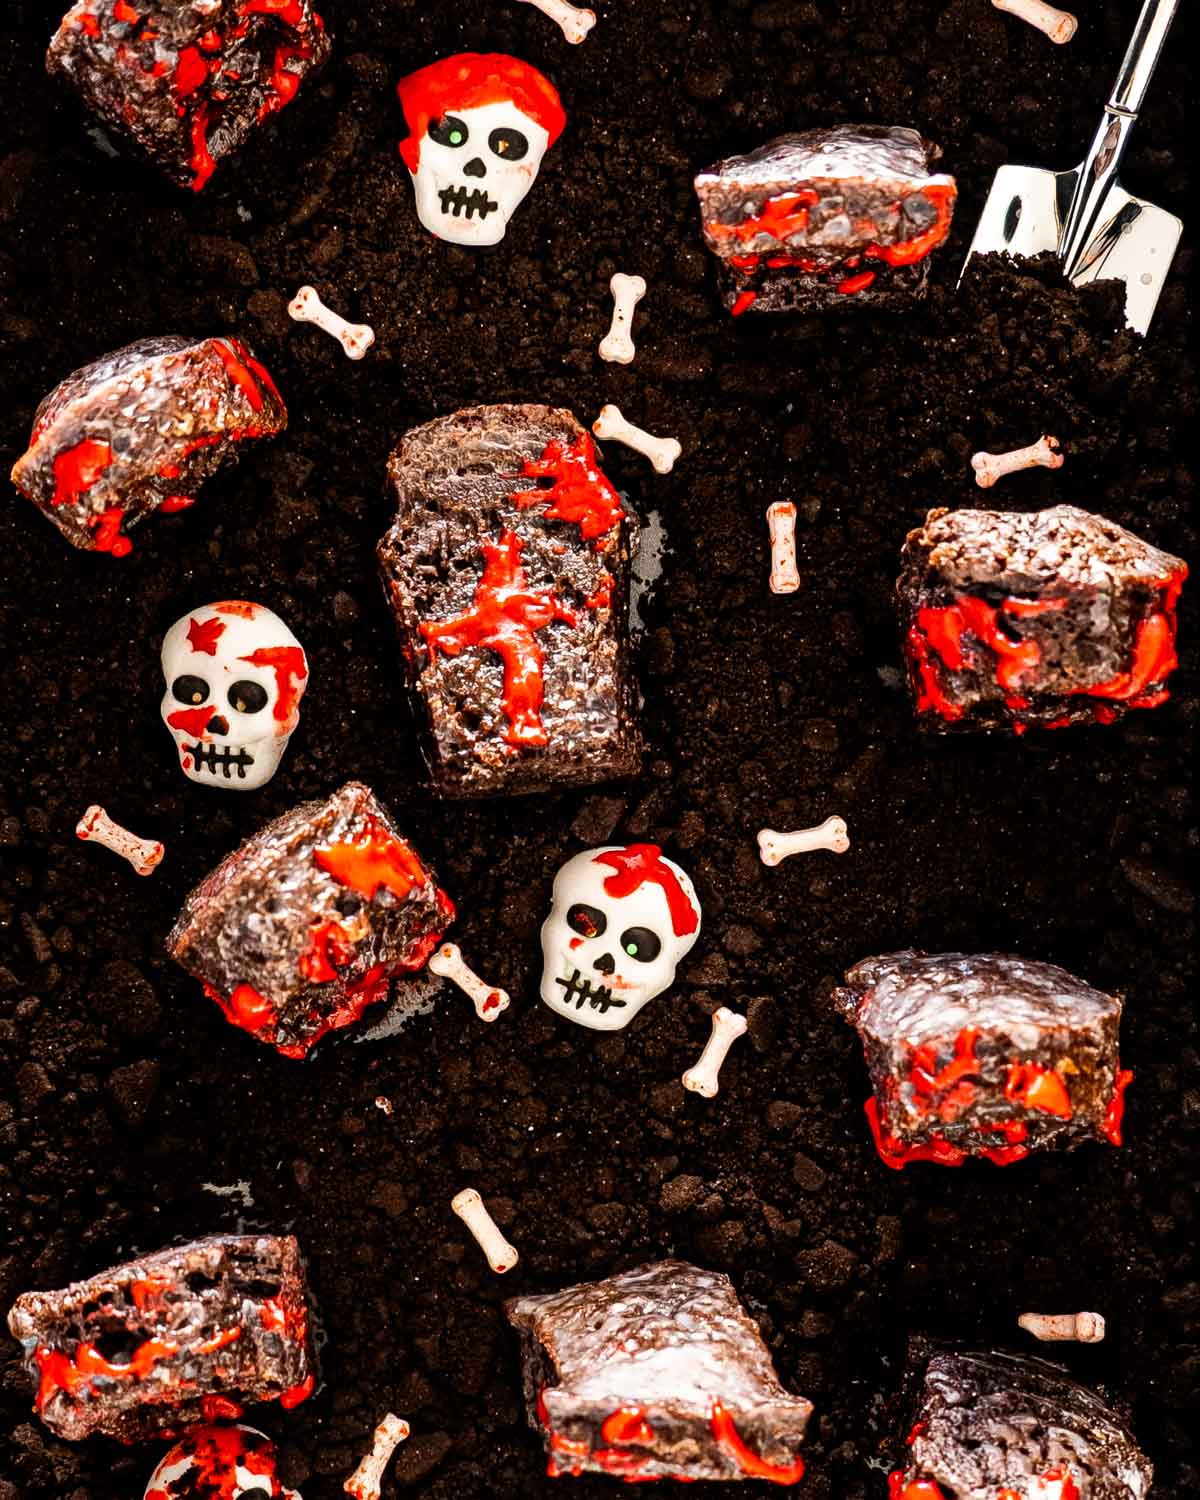 tombstone cakes in a graveyard.